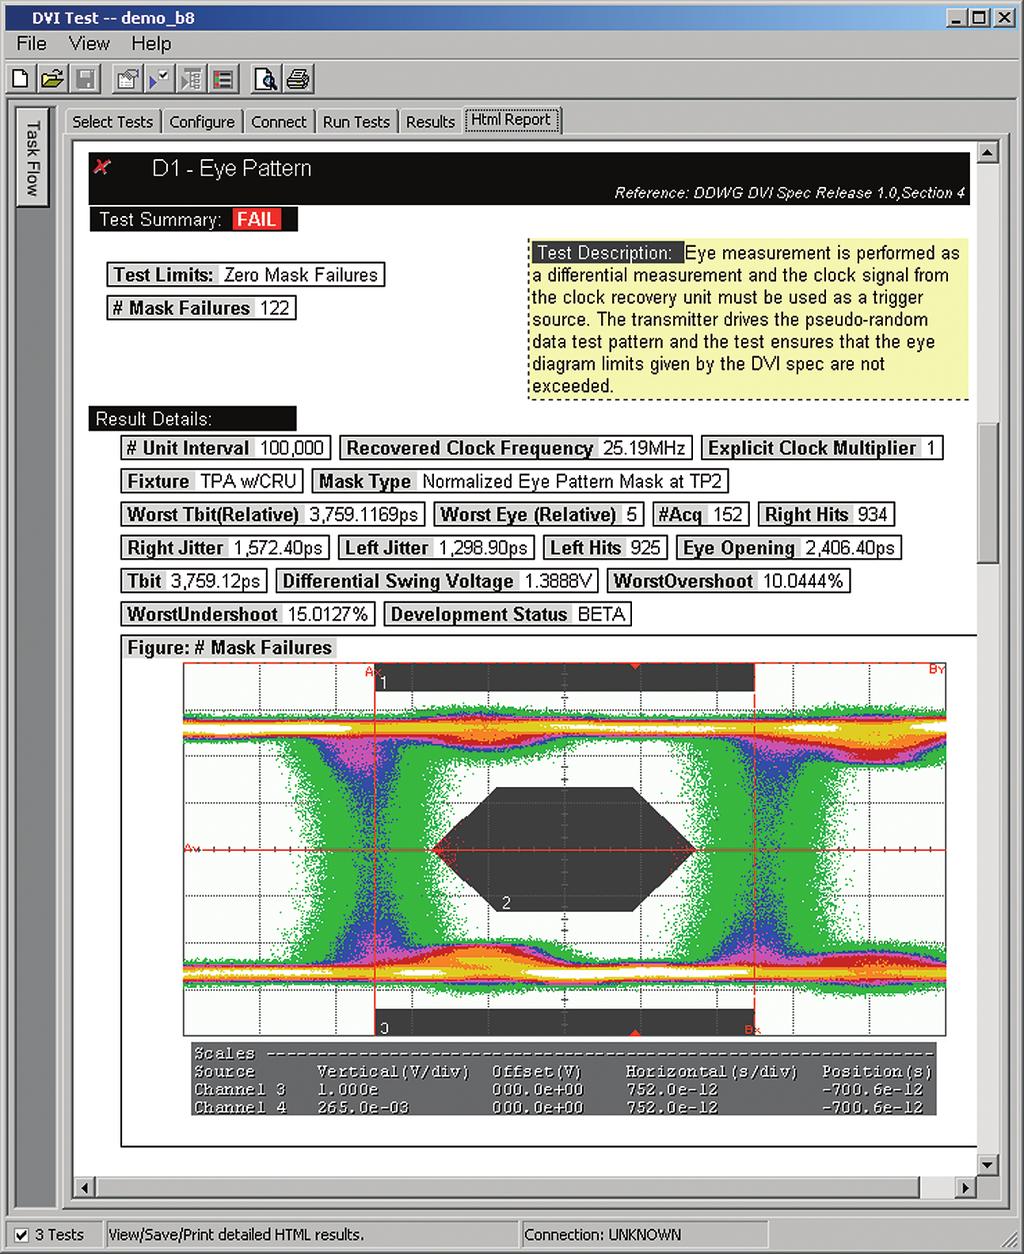 07 Keysight N5394A DVI Electrical Performance Validation and Compliance Software for Infiniium Oscilloscopes Data Sheet Test results in an easy-to-read HTML formatted output Details for each specific